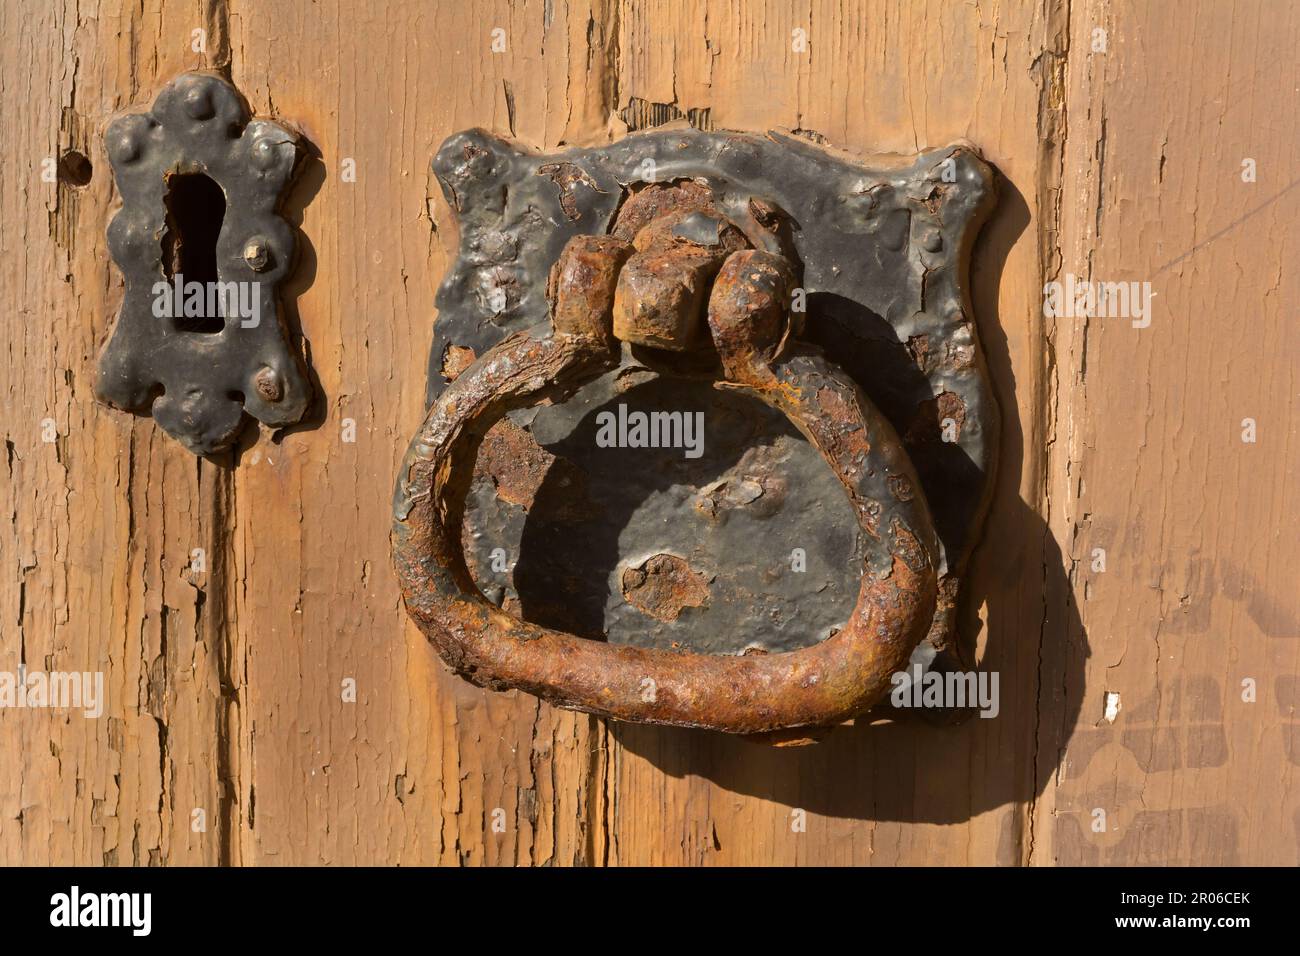 Large church door handle with texture from corrosion Stock Photo